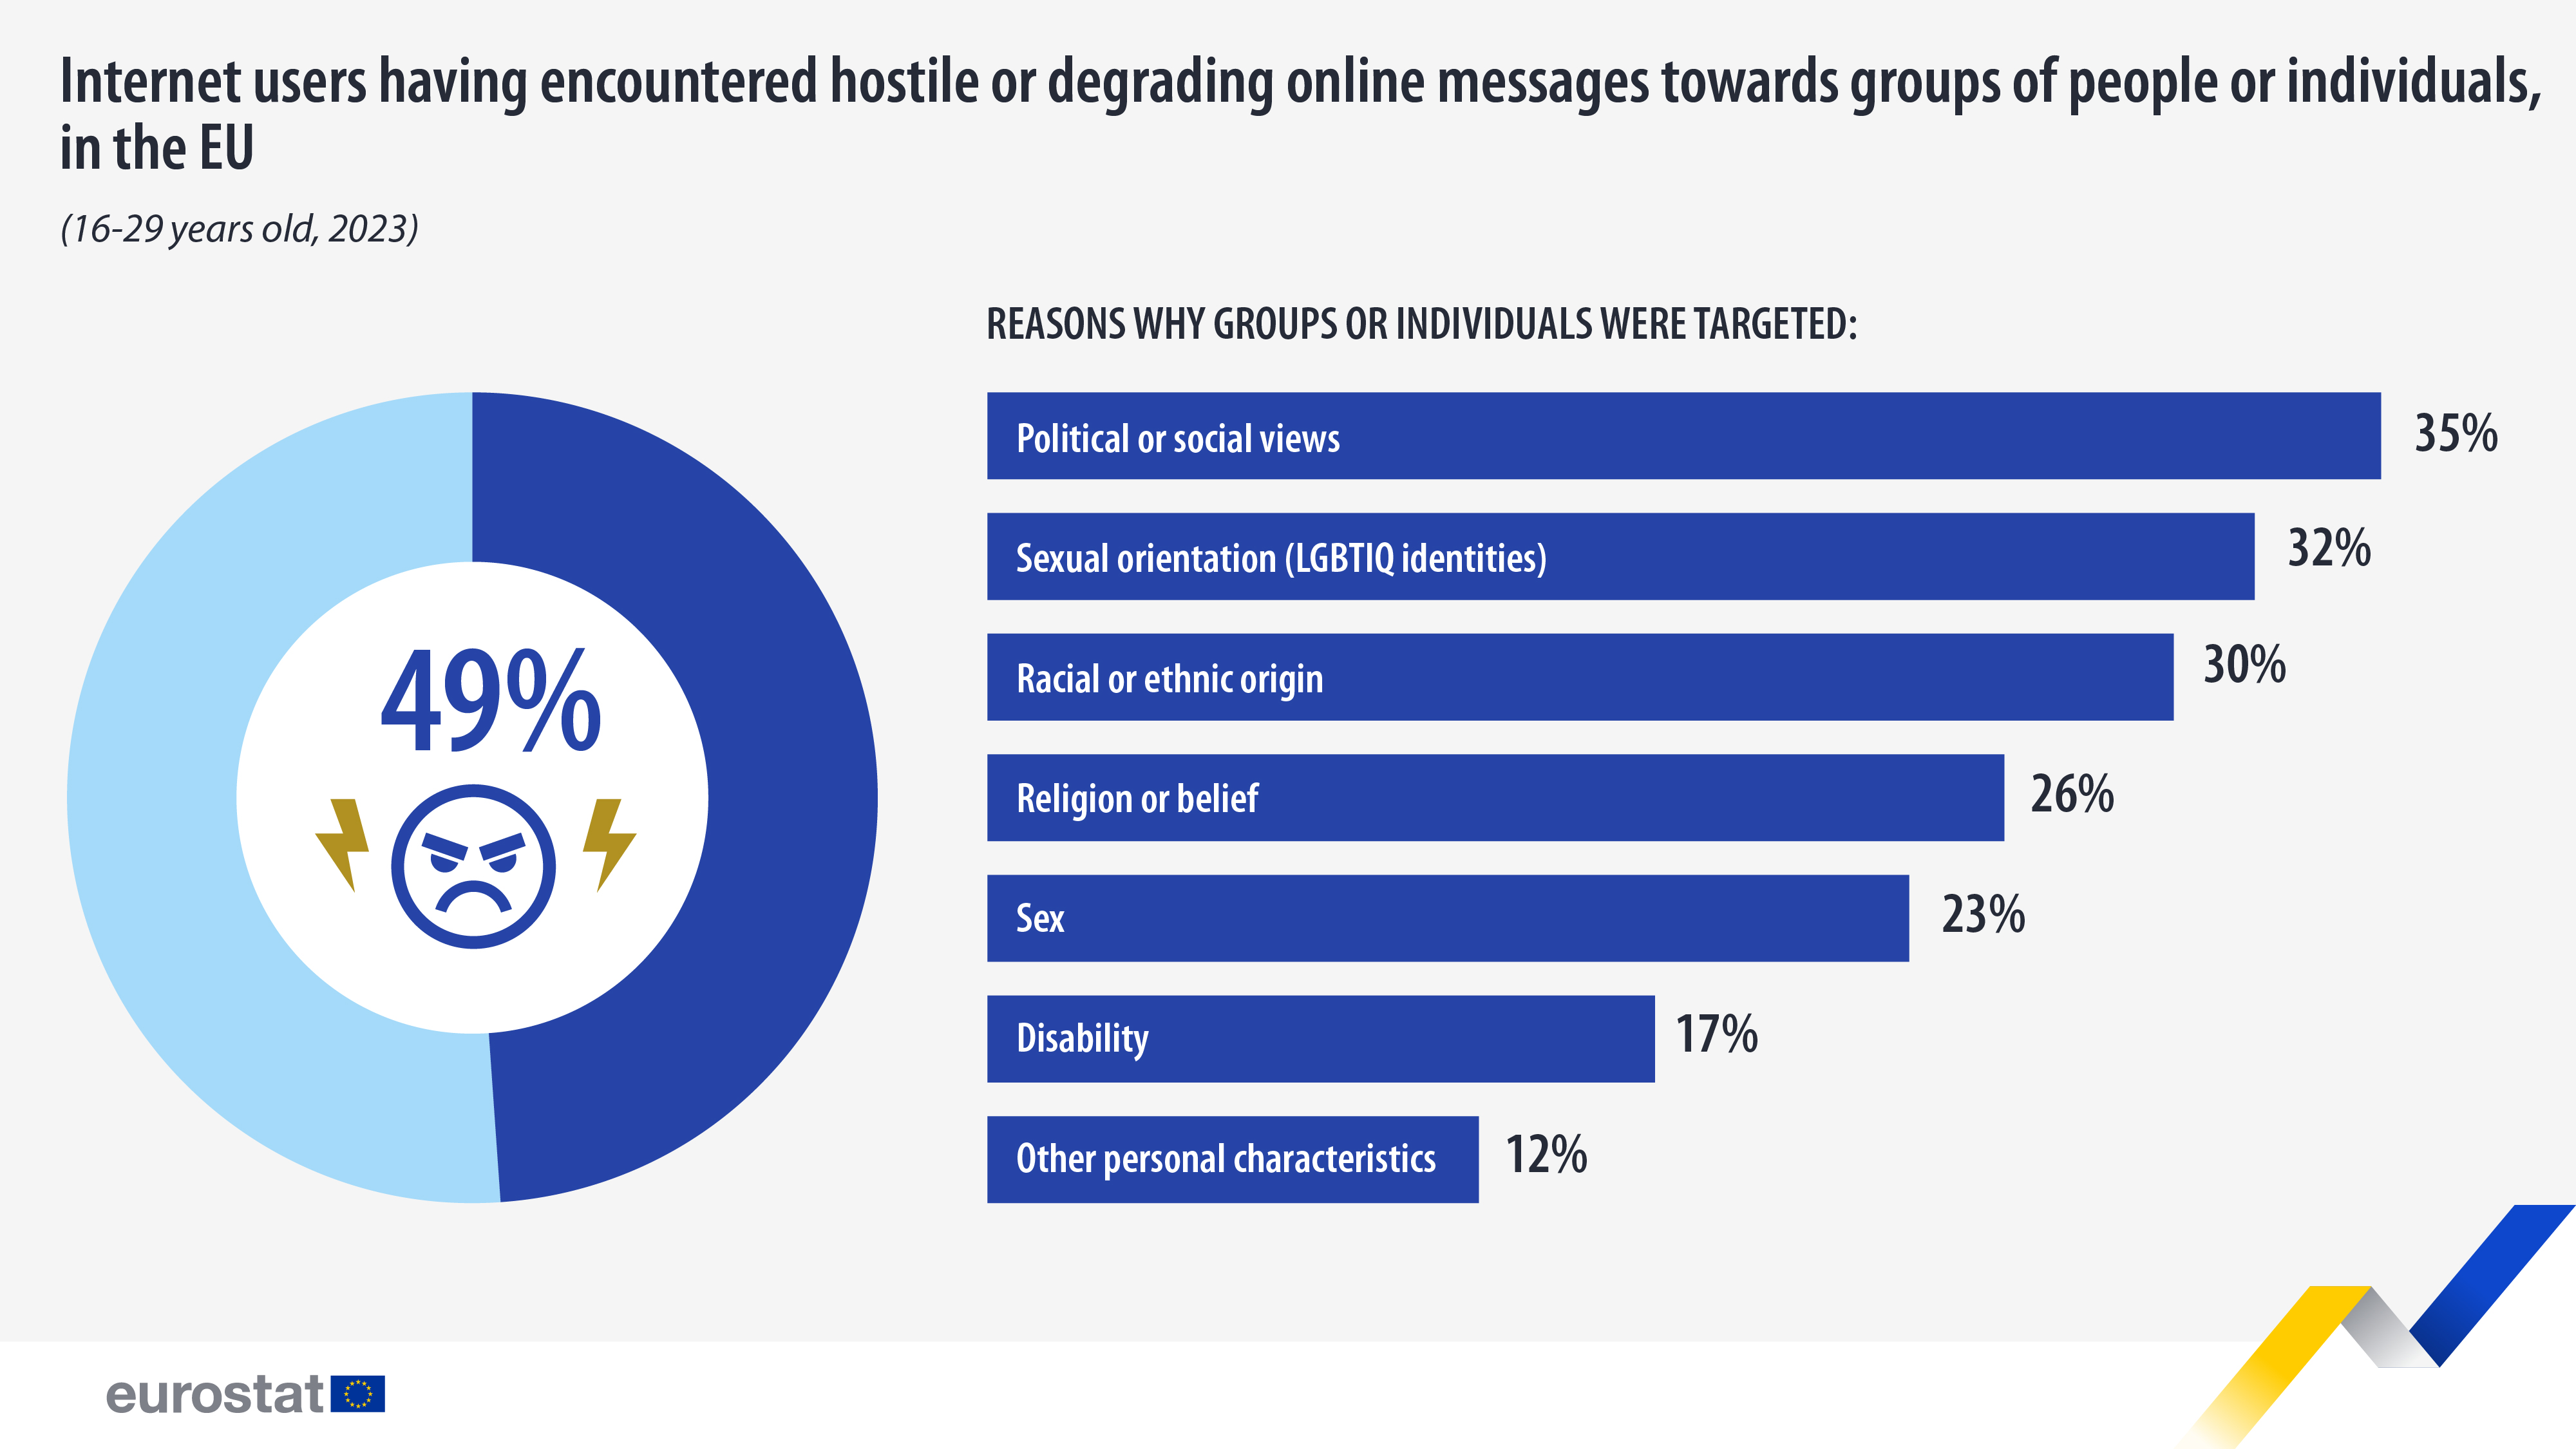 Internet users having encountered hostile or degrading messages, in the EU. towards groups or individuals. 16-29-year-olds in 2023. Bar chart.